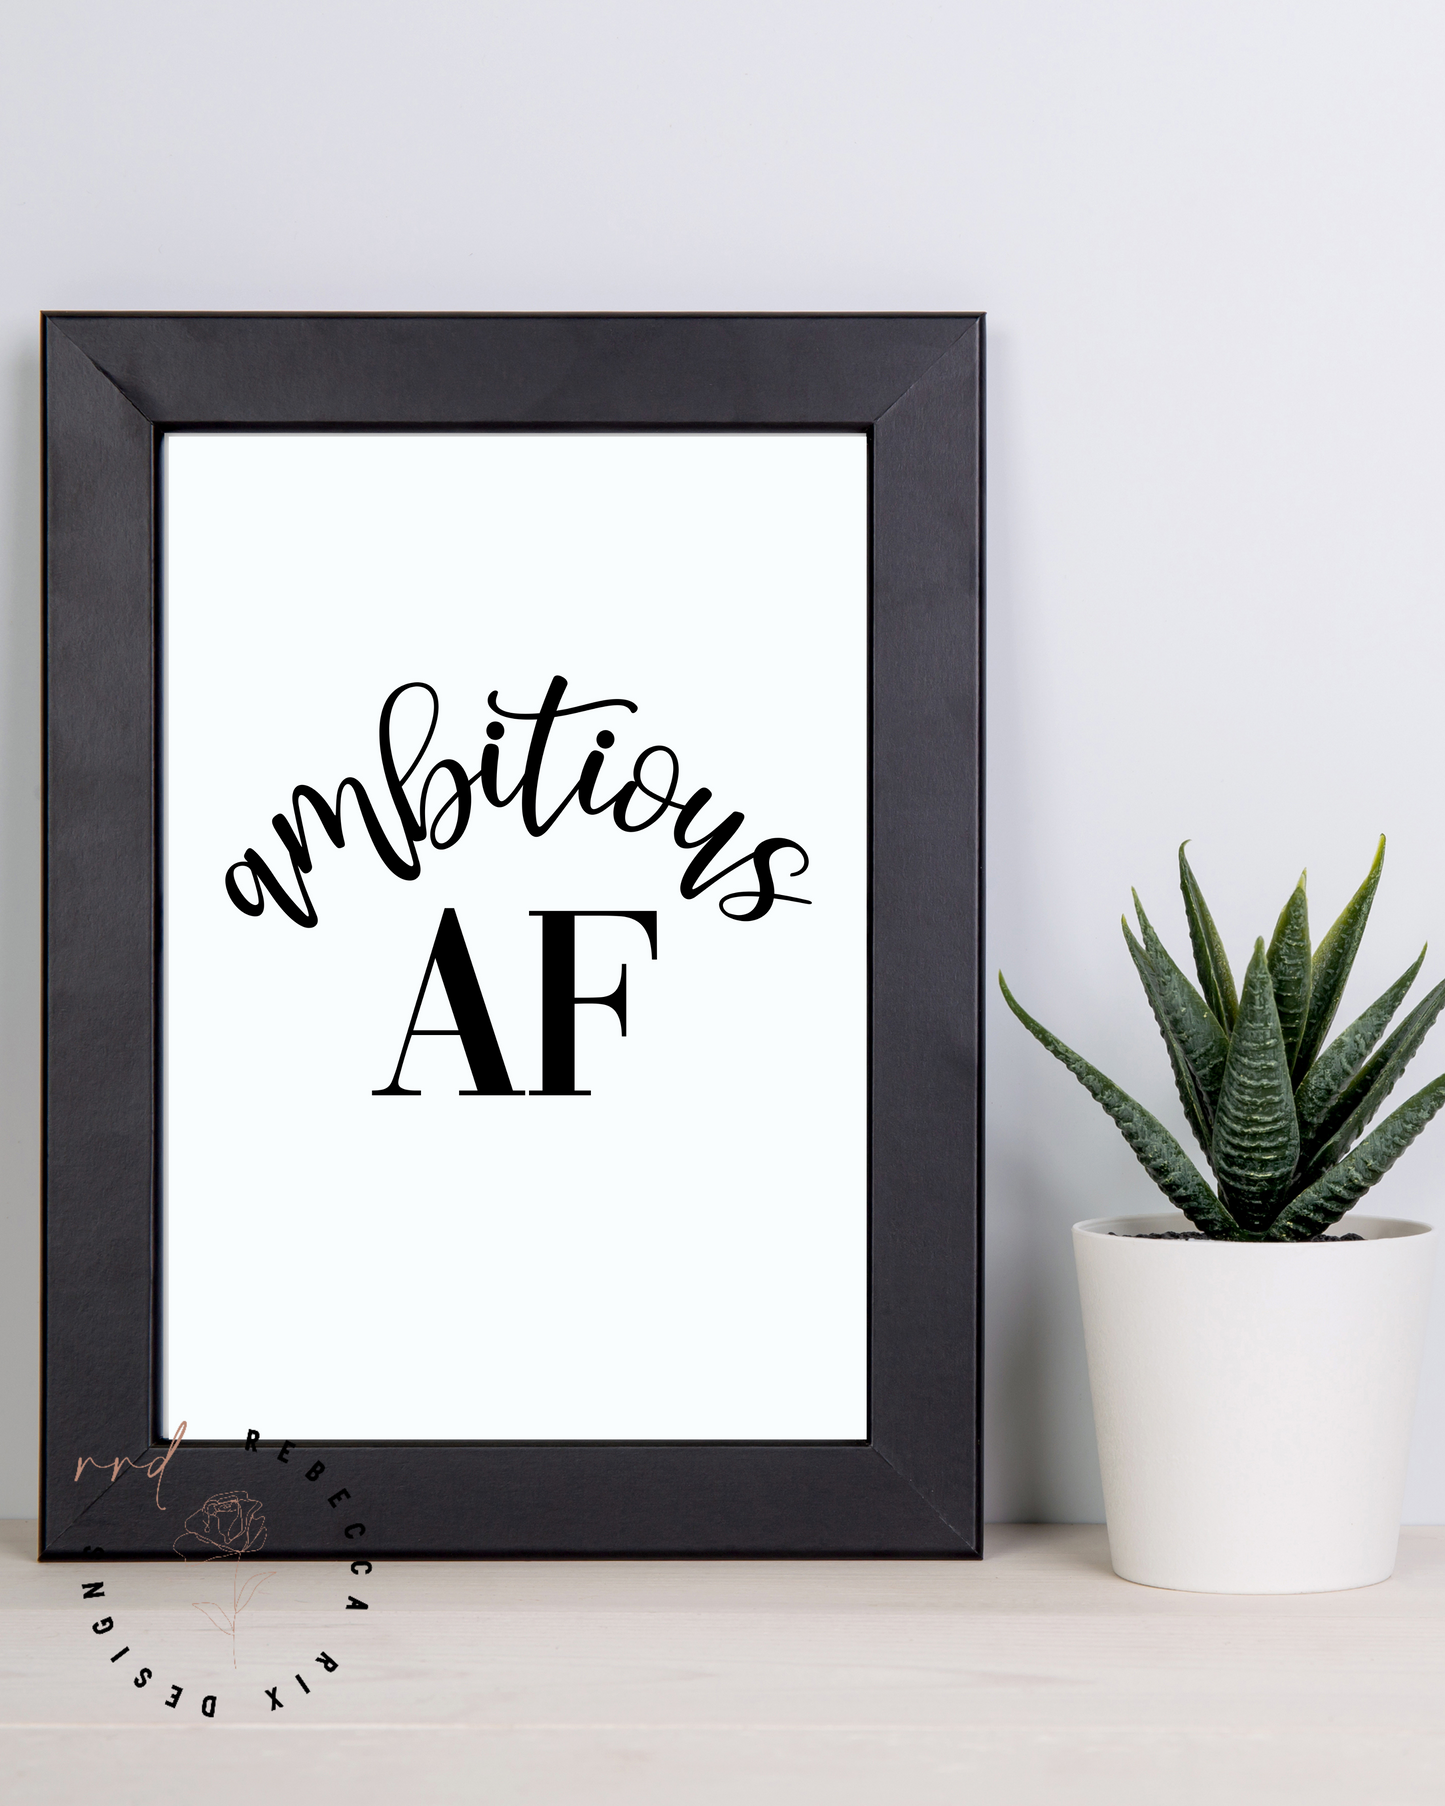 "Ambitious AF" Girl Boss Quote, Printable Art